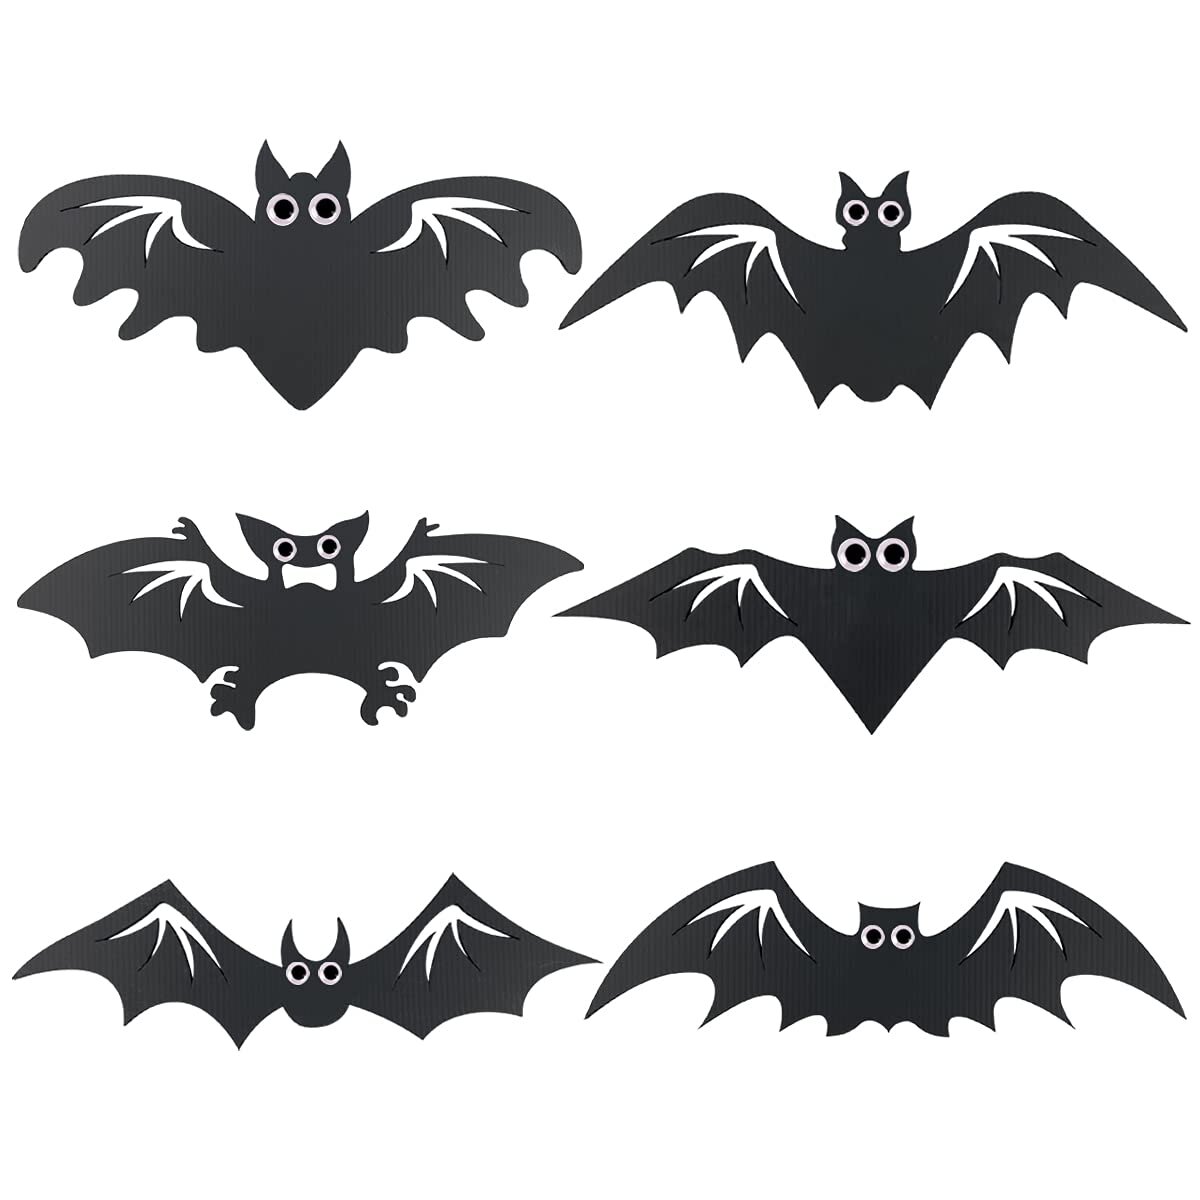 Scary Funny Party Celebration 6 Sizes Set Window Clings Wall Decal Decor for Kids Room ERS 72PC 3D Bats Sticker Halloween Decoration bright black 